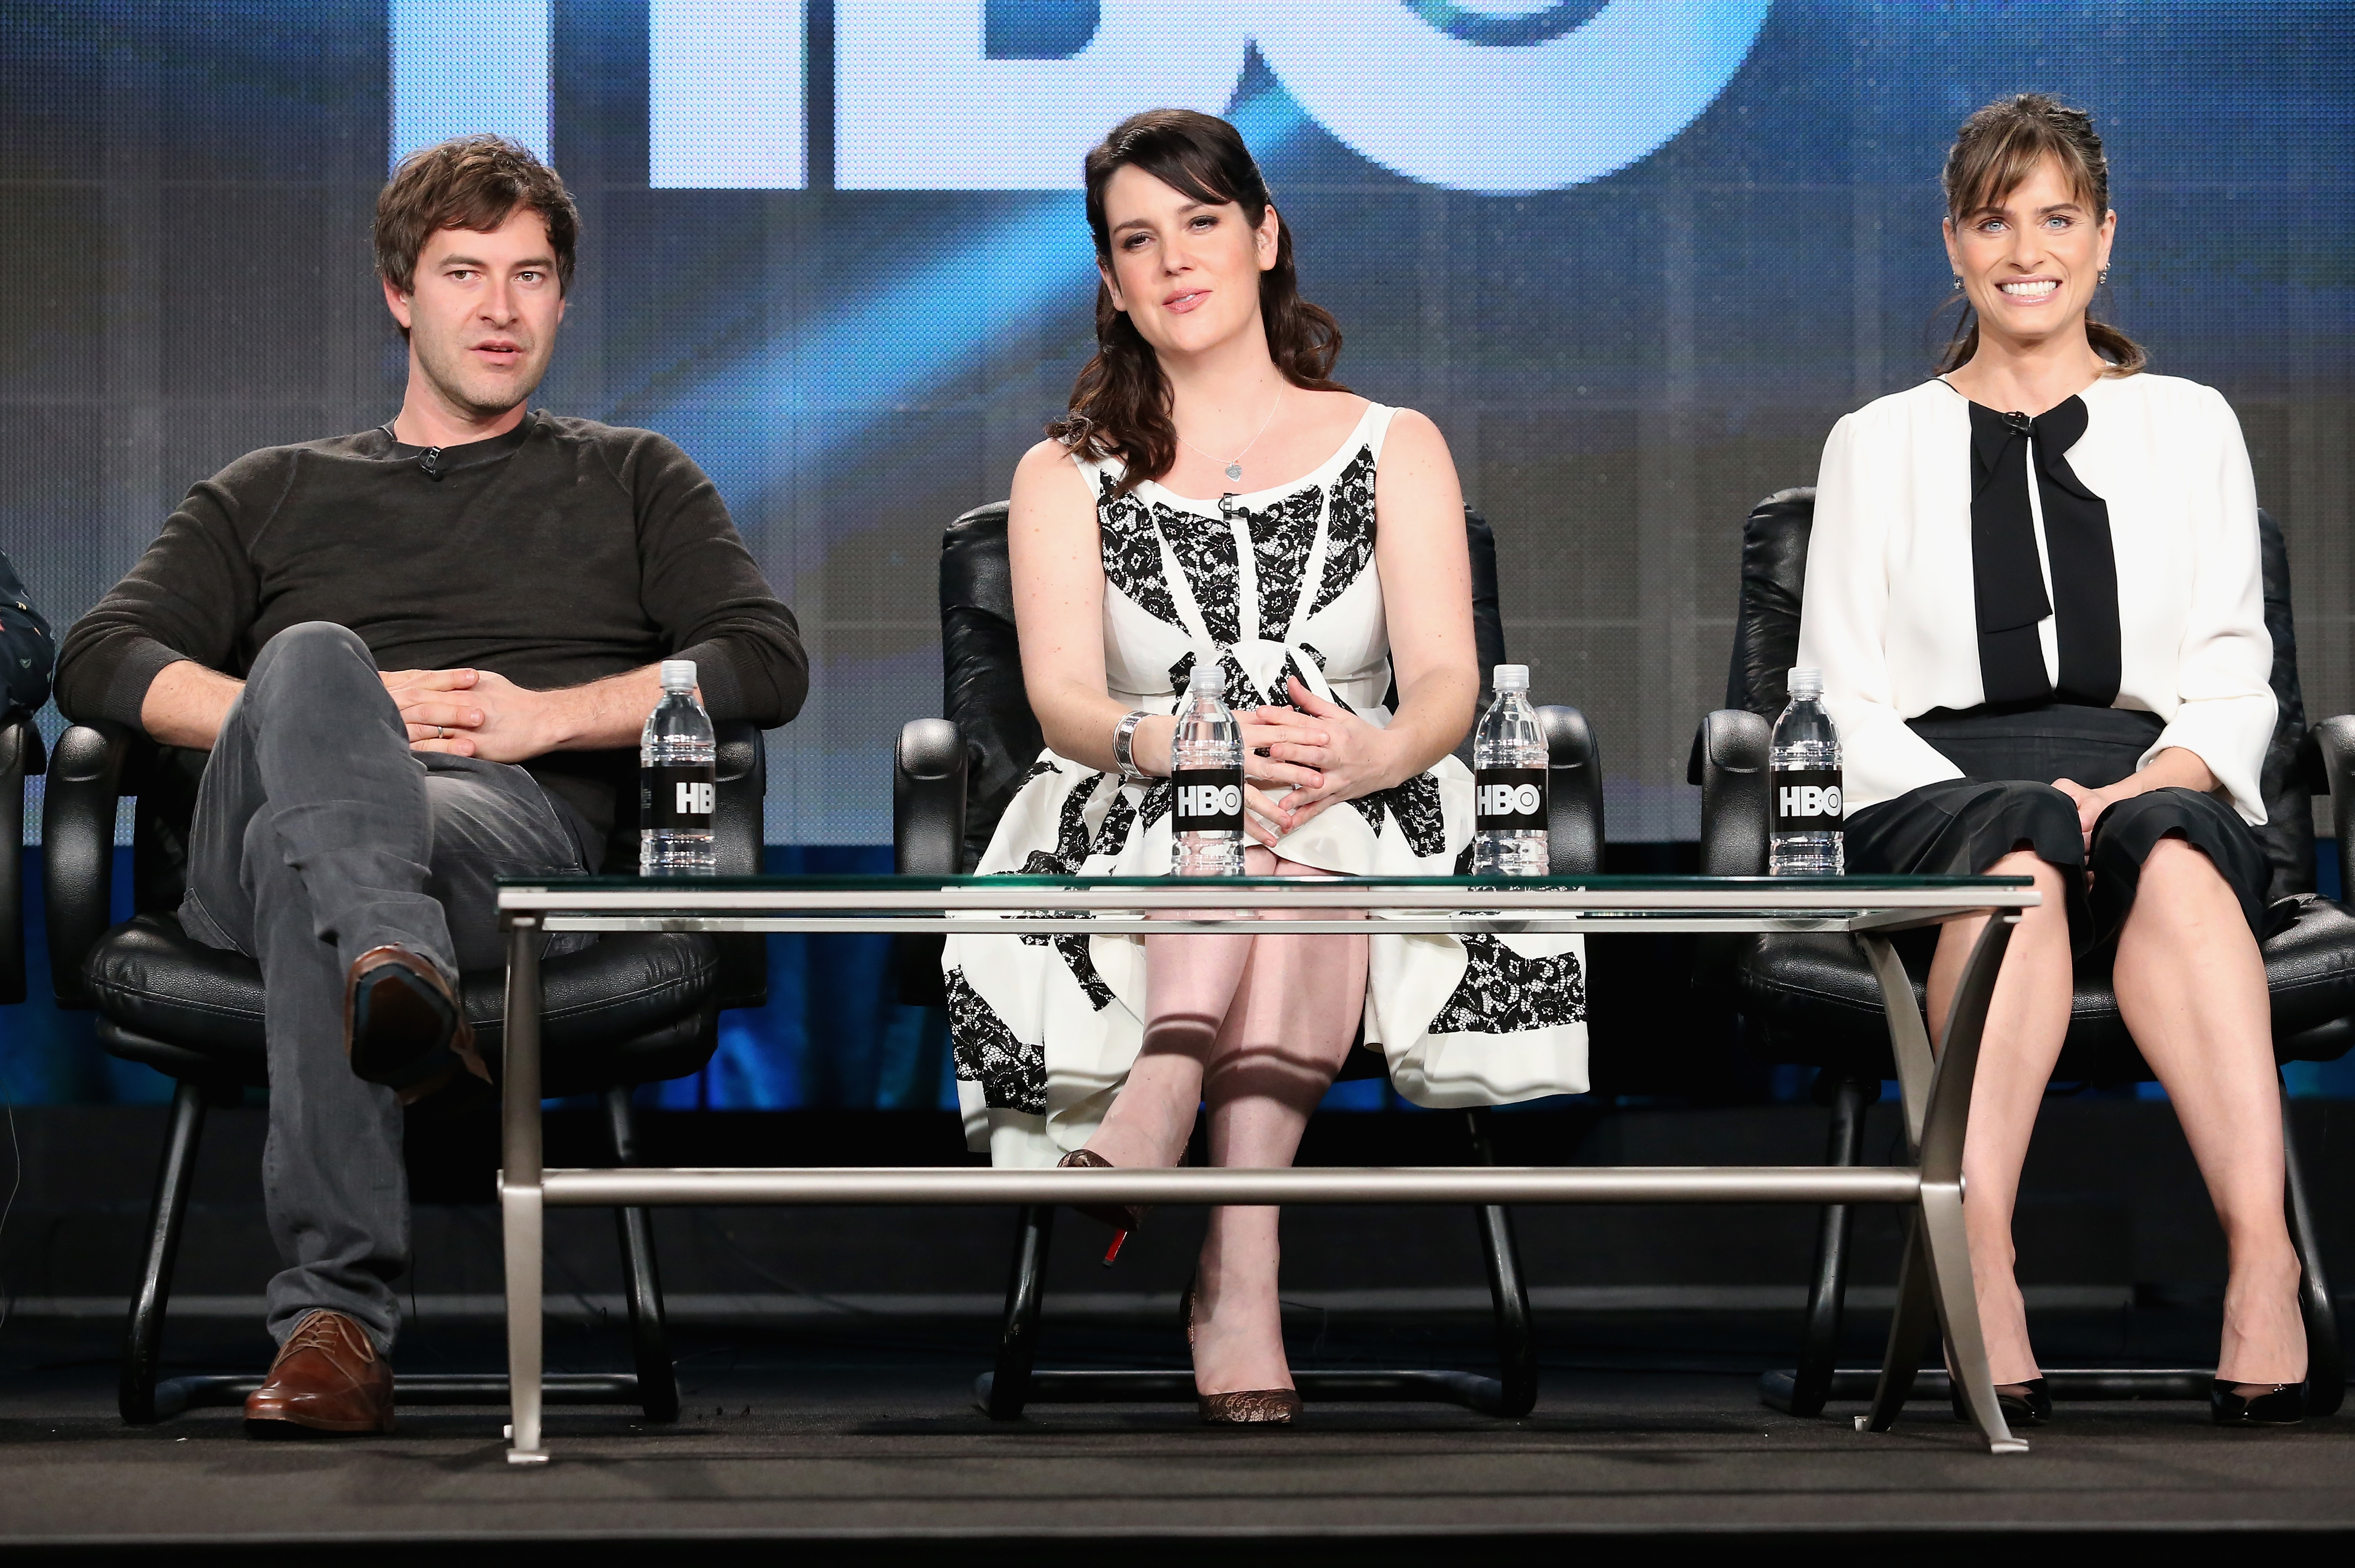 (L-R) Writer/Director Mark Duplass, and actors Melanie Lynskey and Amanda Peet, speak onstage during the 'Togetherness' panel at the HBO portion of the 2015 Winter Television Critics Association press tour at the Langham Hotel on January 8, 2015 in Pasadena, California. (Frederick M. Brown—2015 Getty Images)